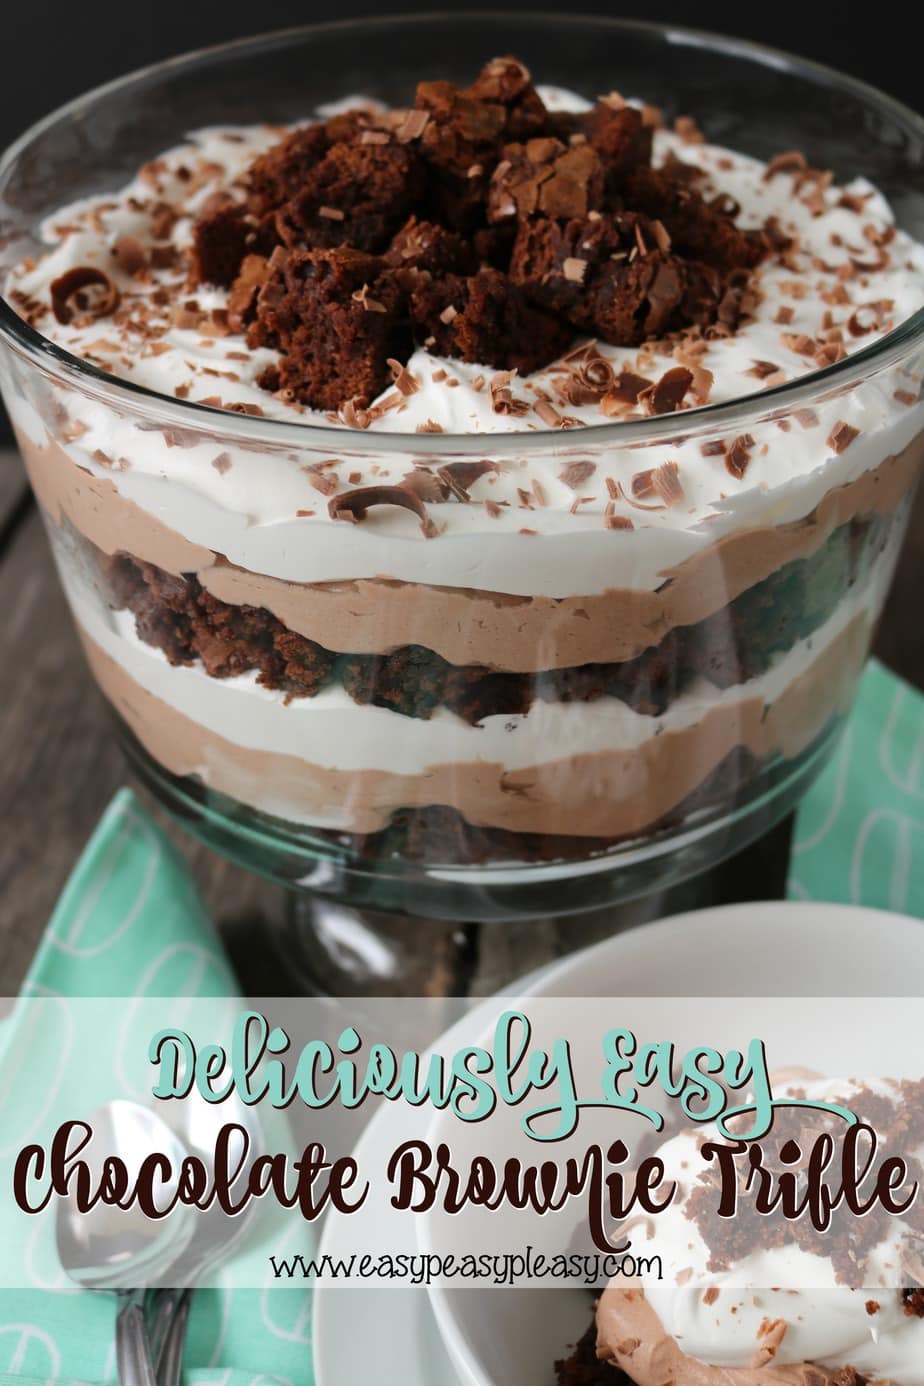 Impress your family and friends with this super Deliciously Easy Chocolate Brownie Trifle!